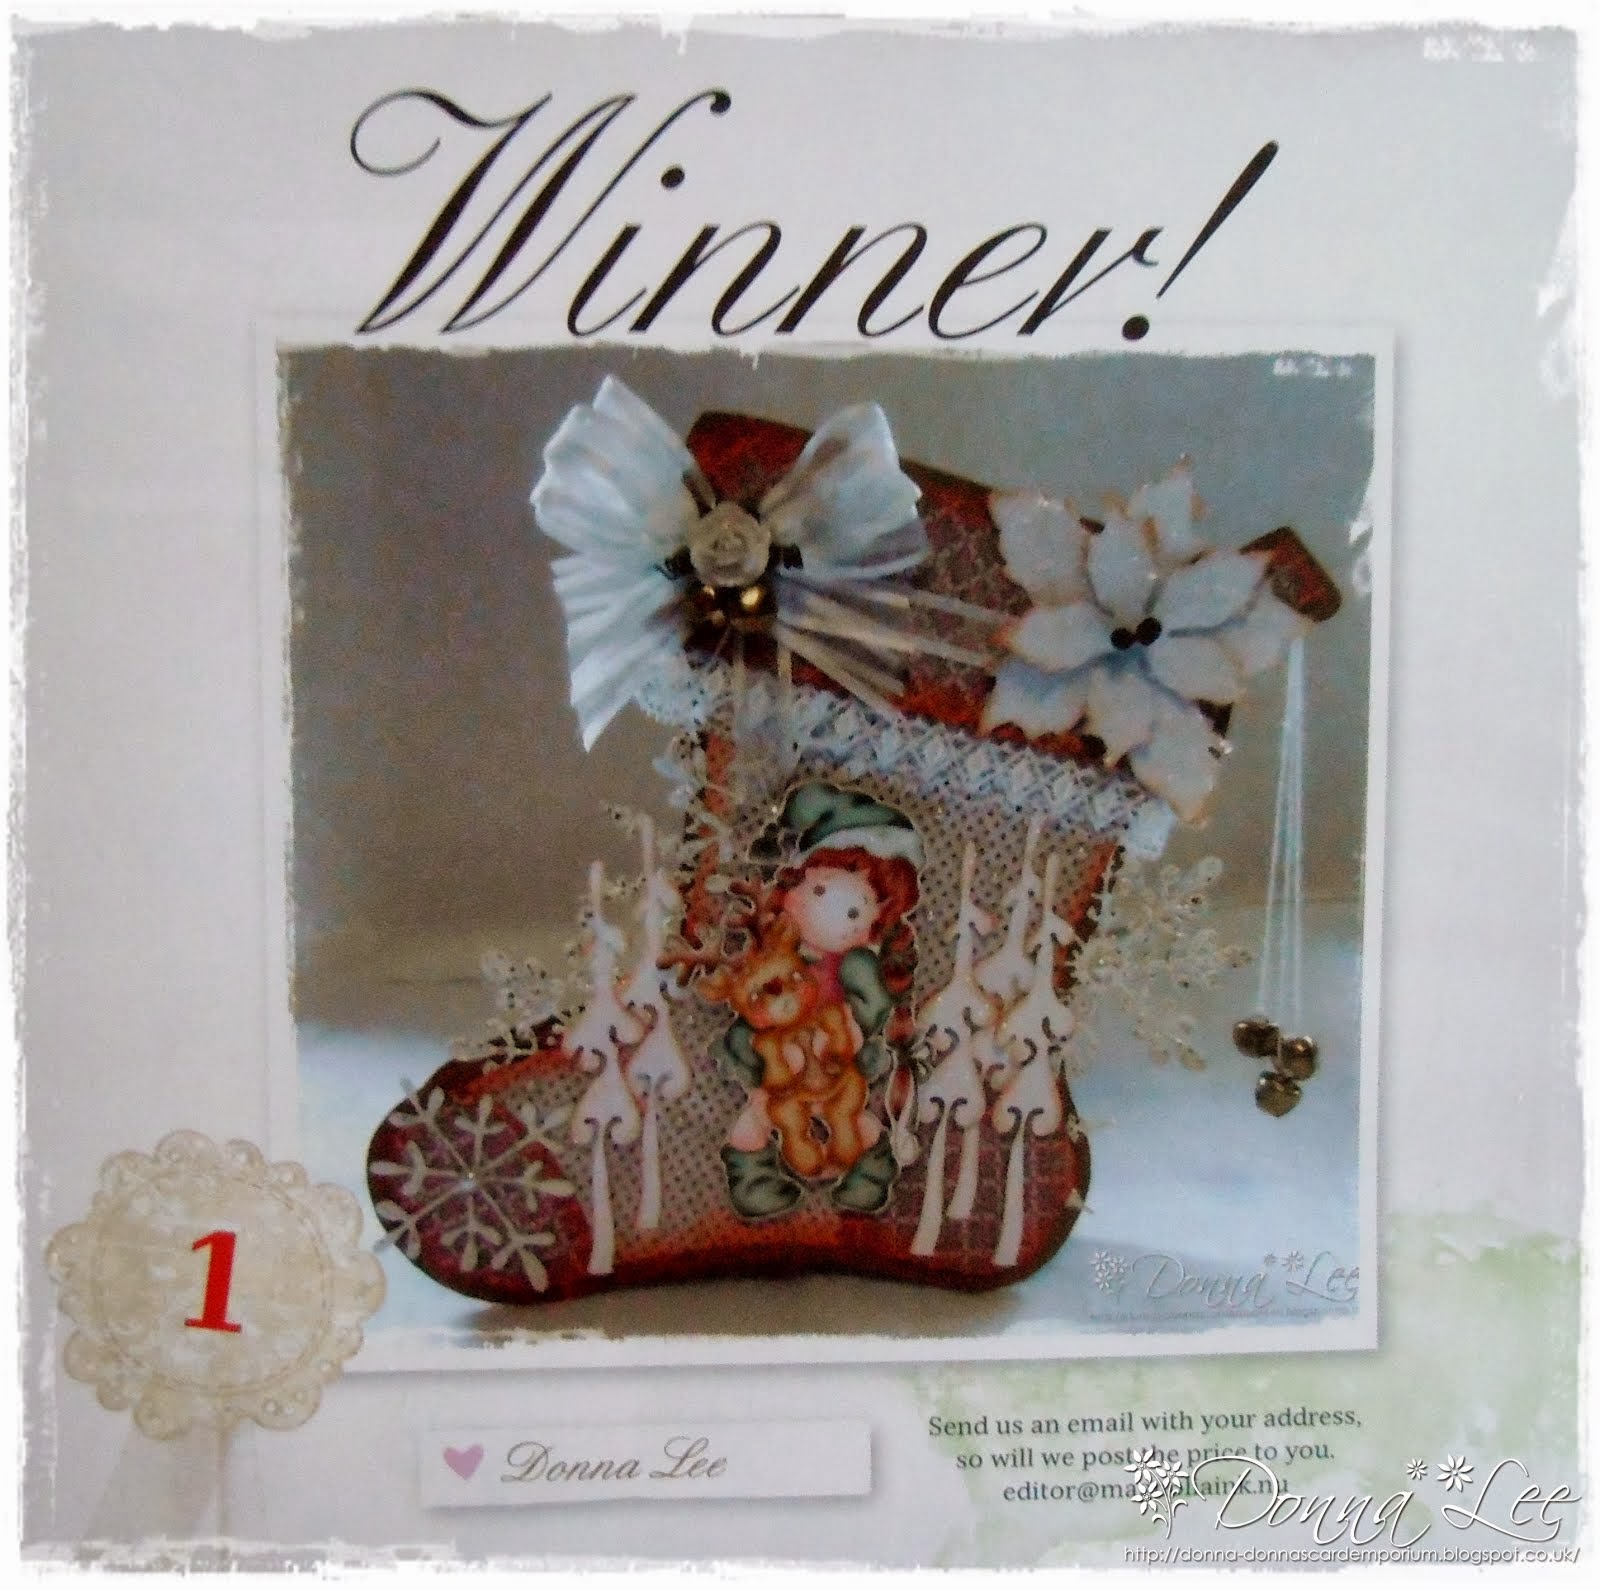 So proud to be the Christmas stocking contest winner!